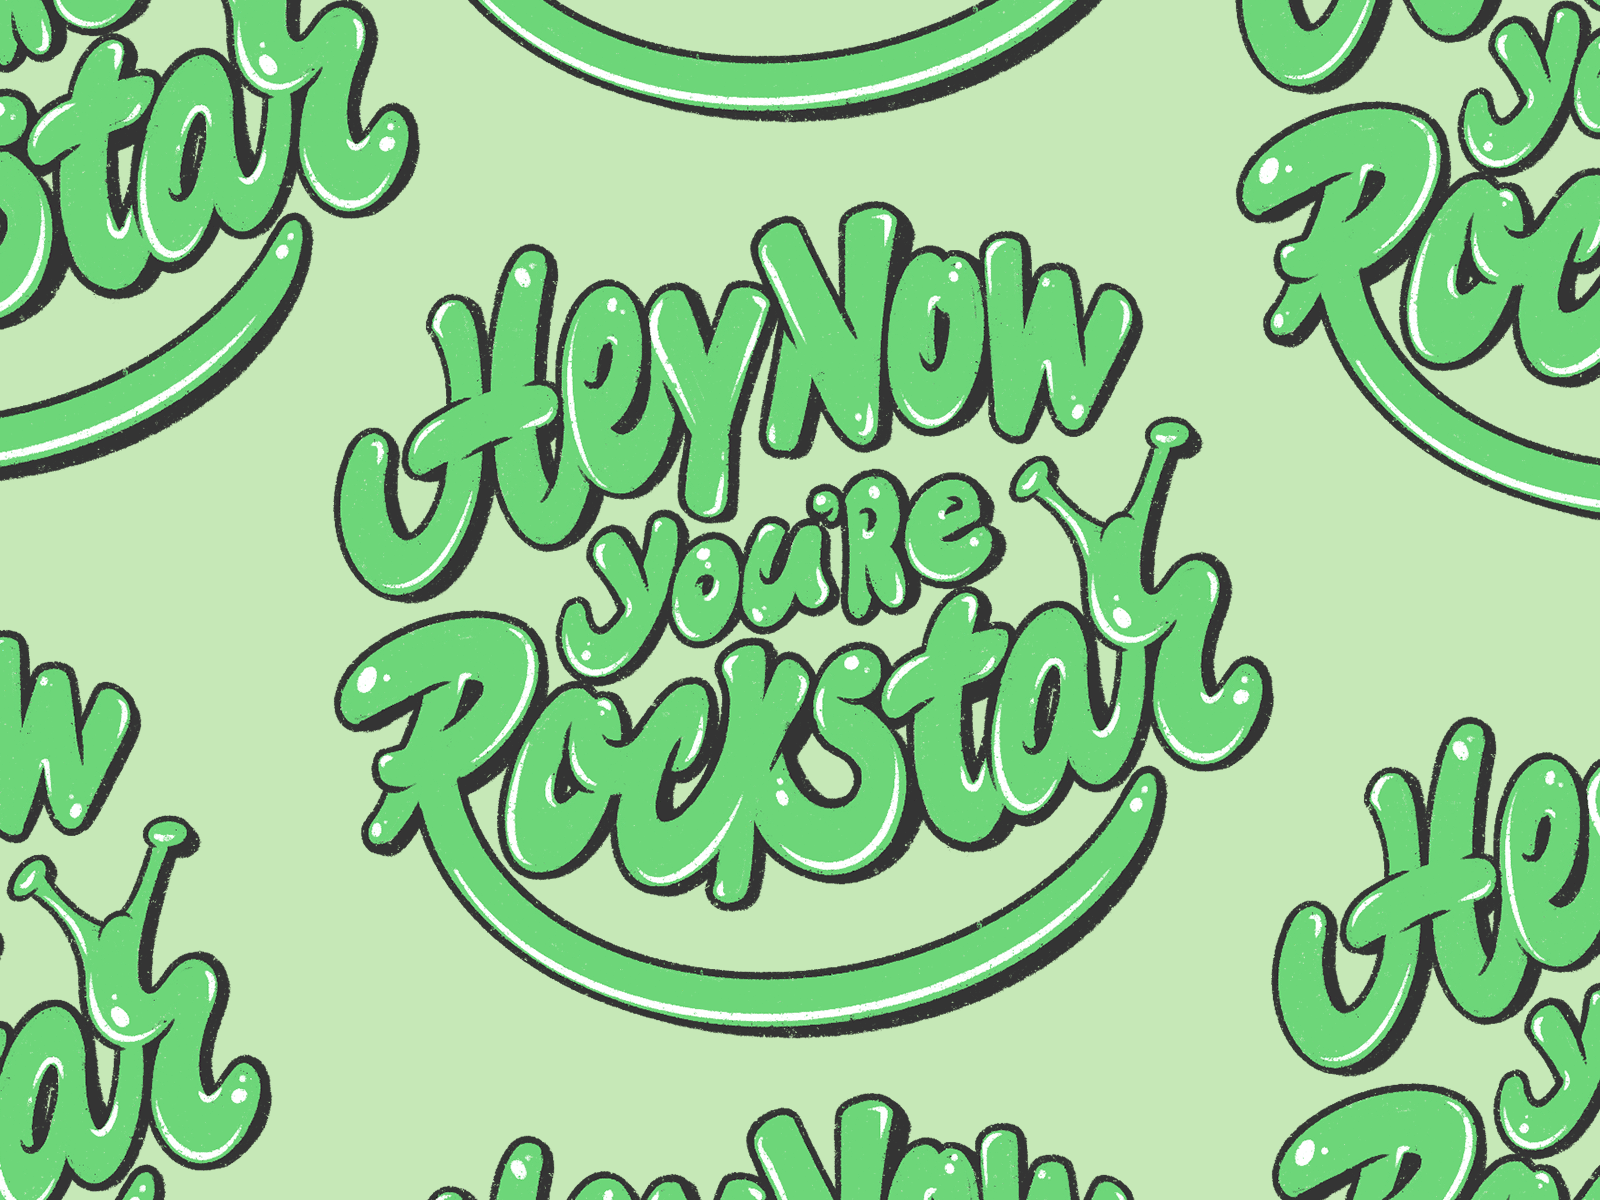 Hey Now You're Rockstar – lettering animation calligraphy illustration lettering print sketch typography